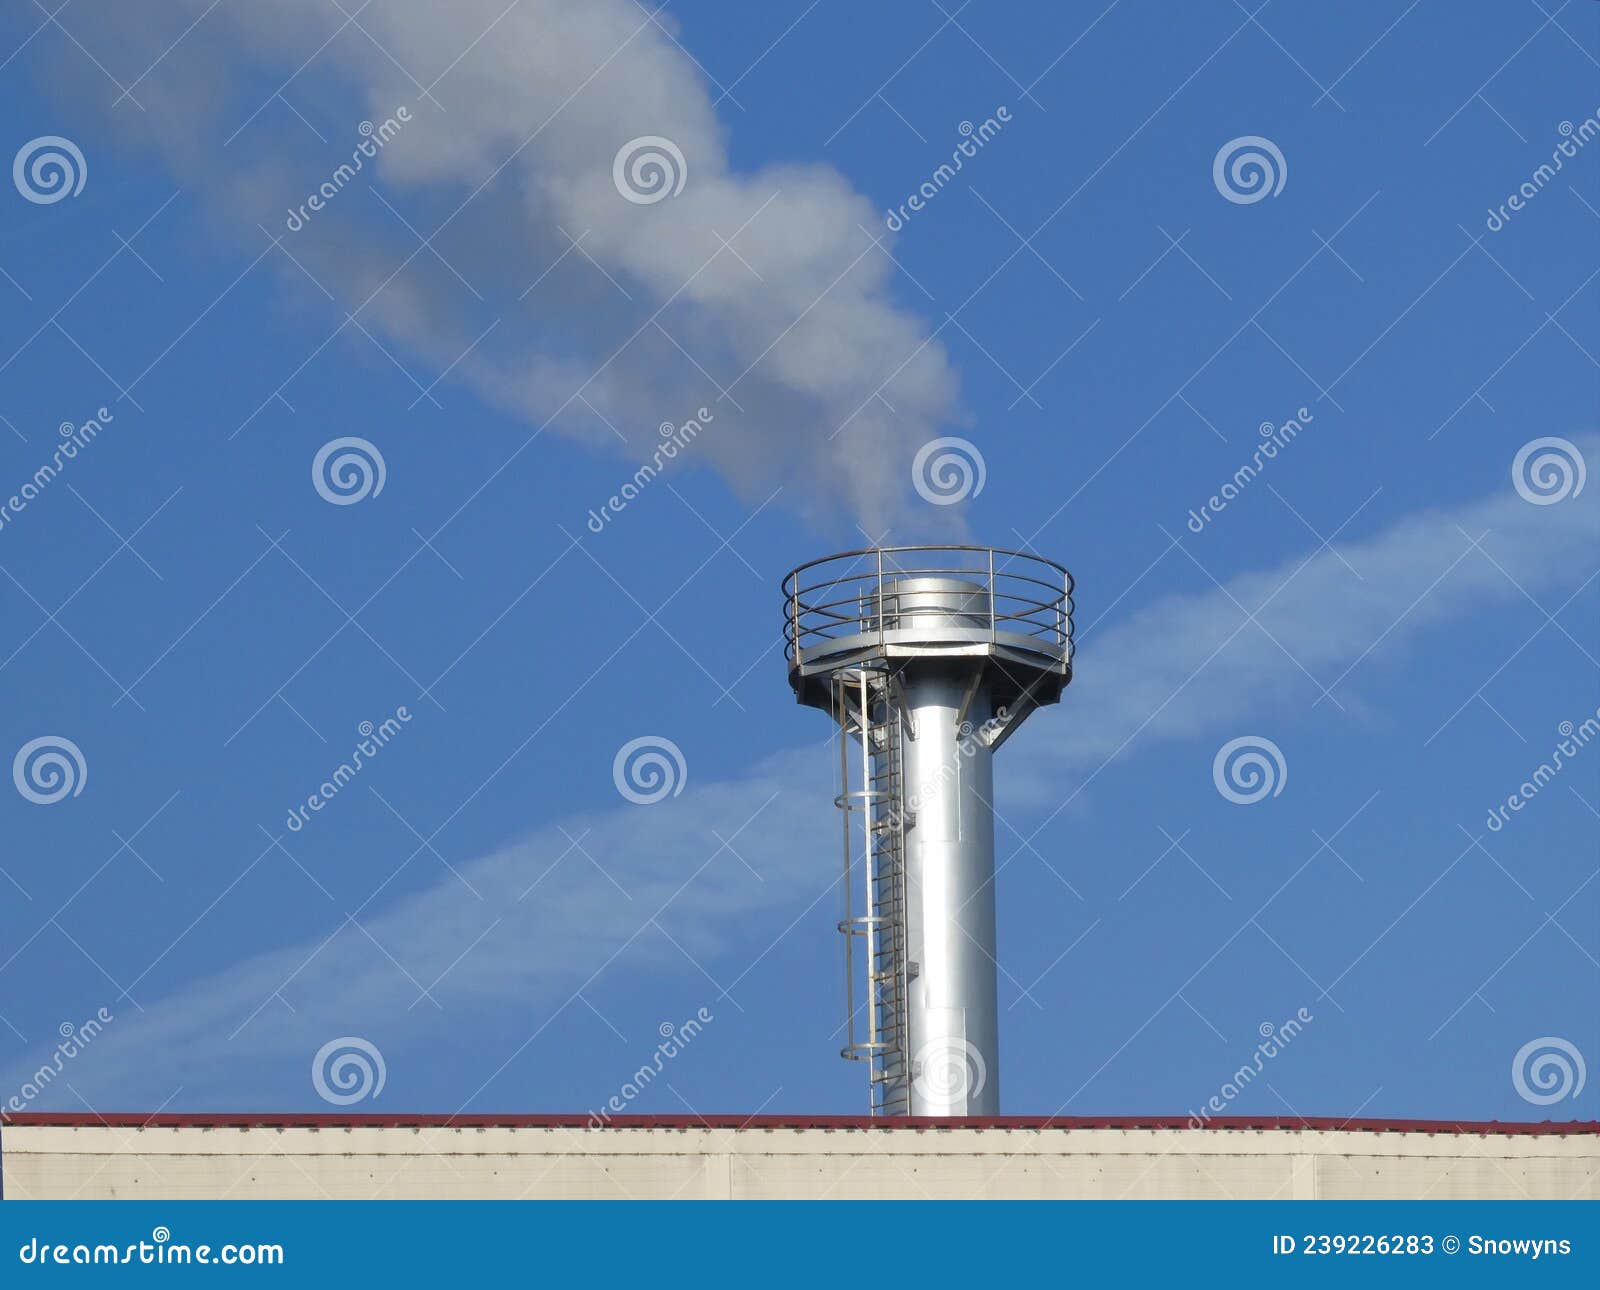 smoke spews out of a chimney on the roof at an industrial plant